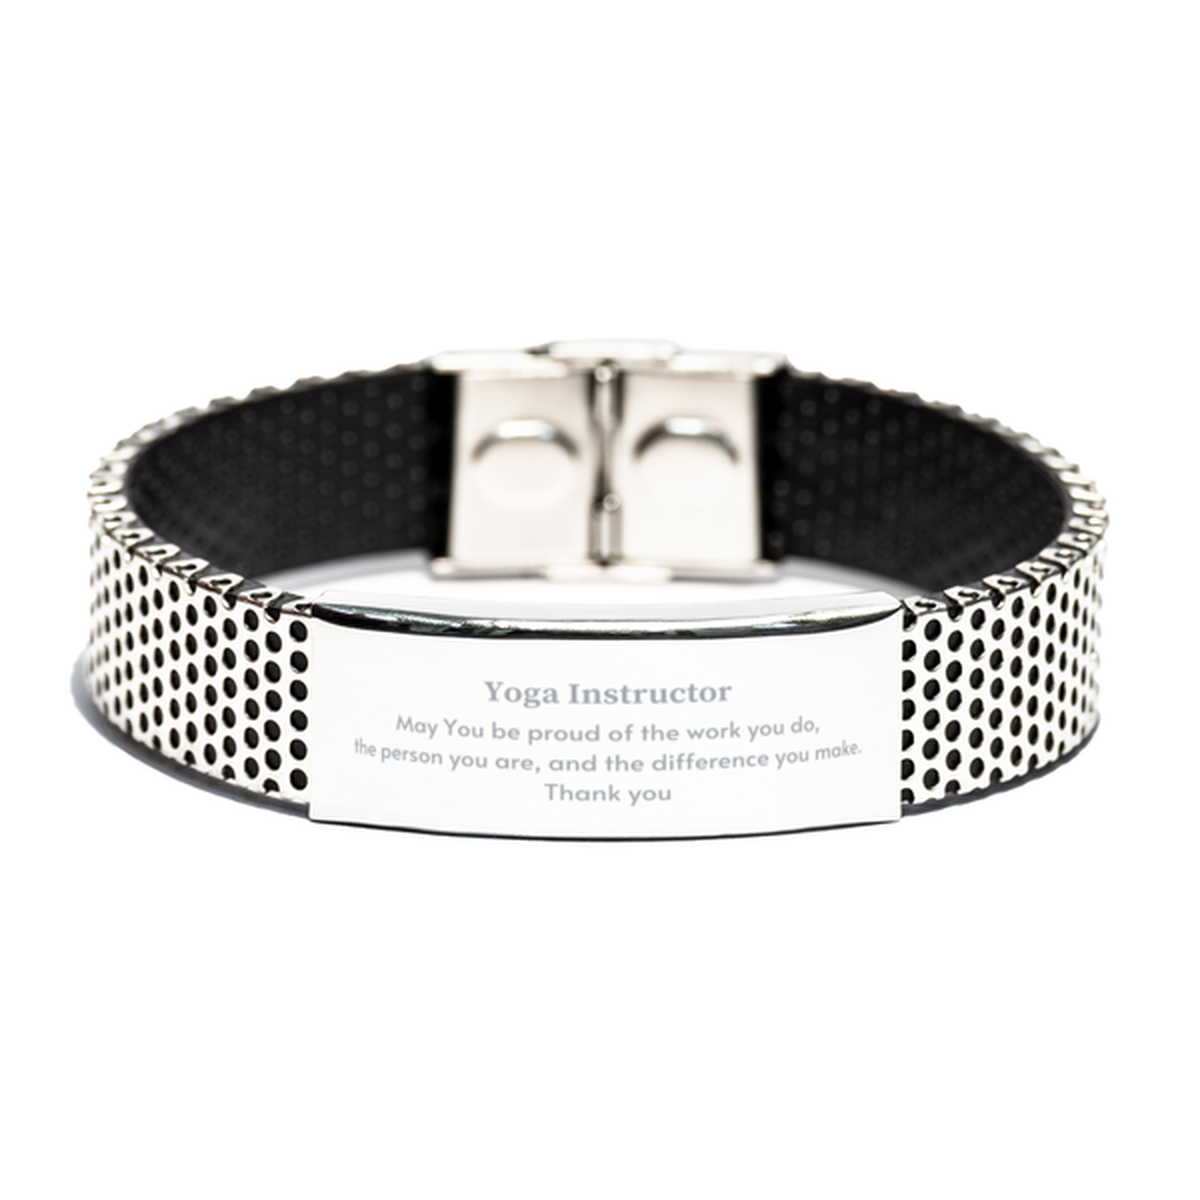 Heartwarming Stainless Steel Bracelet Retirement Coworkers Gifts for Yoga Instructor, Yoga Instructor May You be proud of the work you do, the person you are Gifts for Boss Men Women Friends